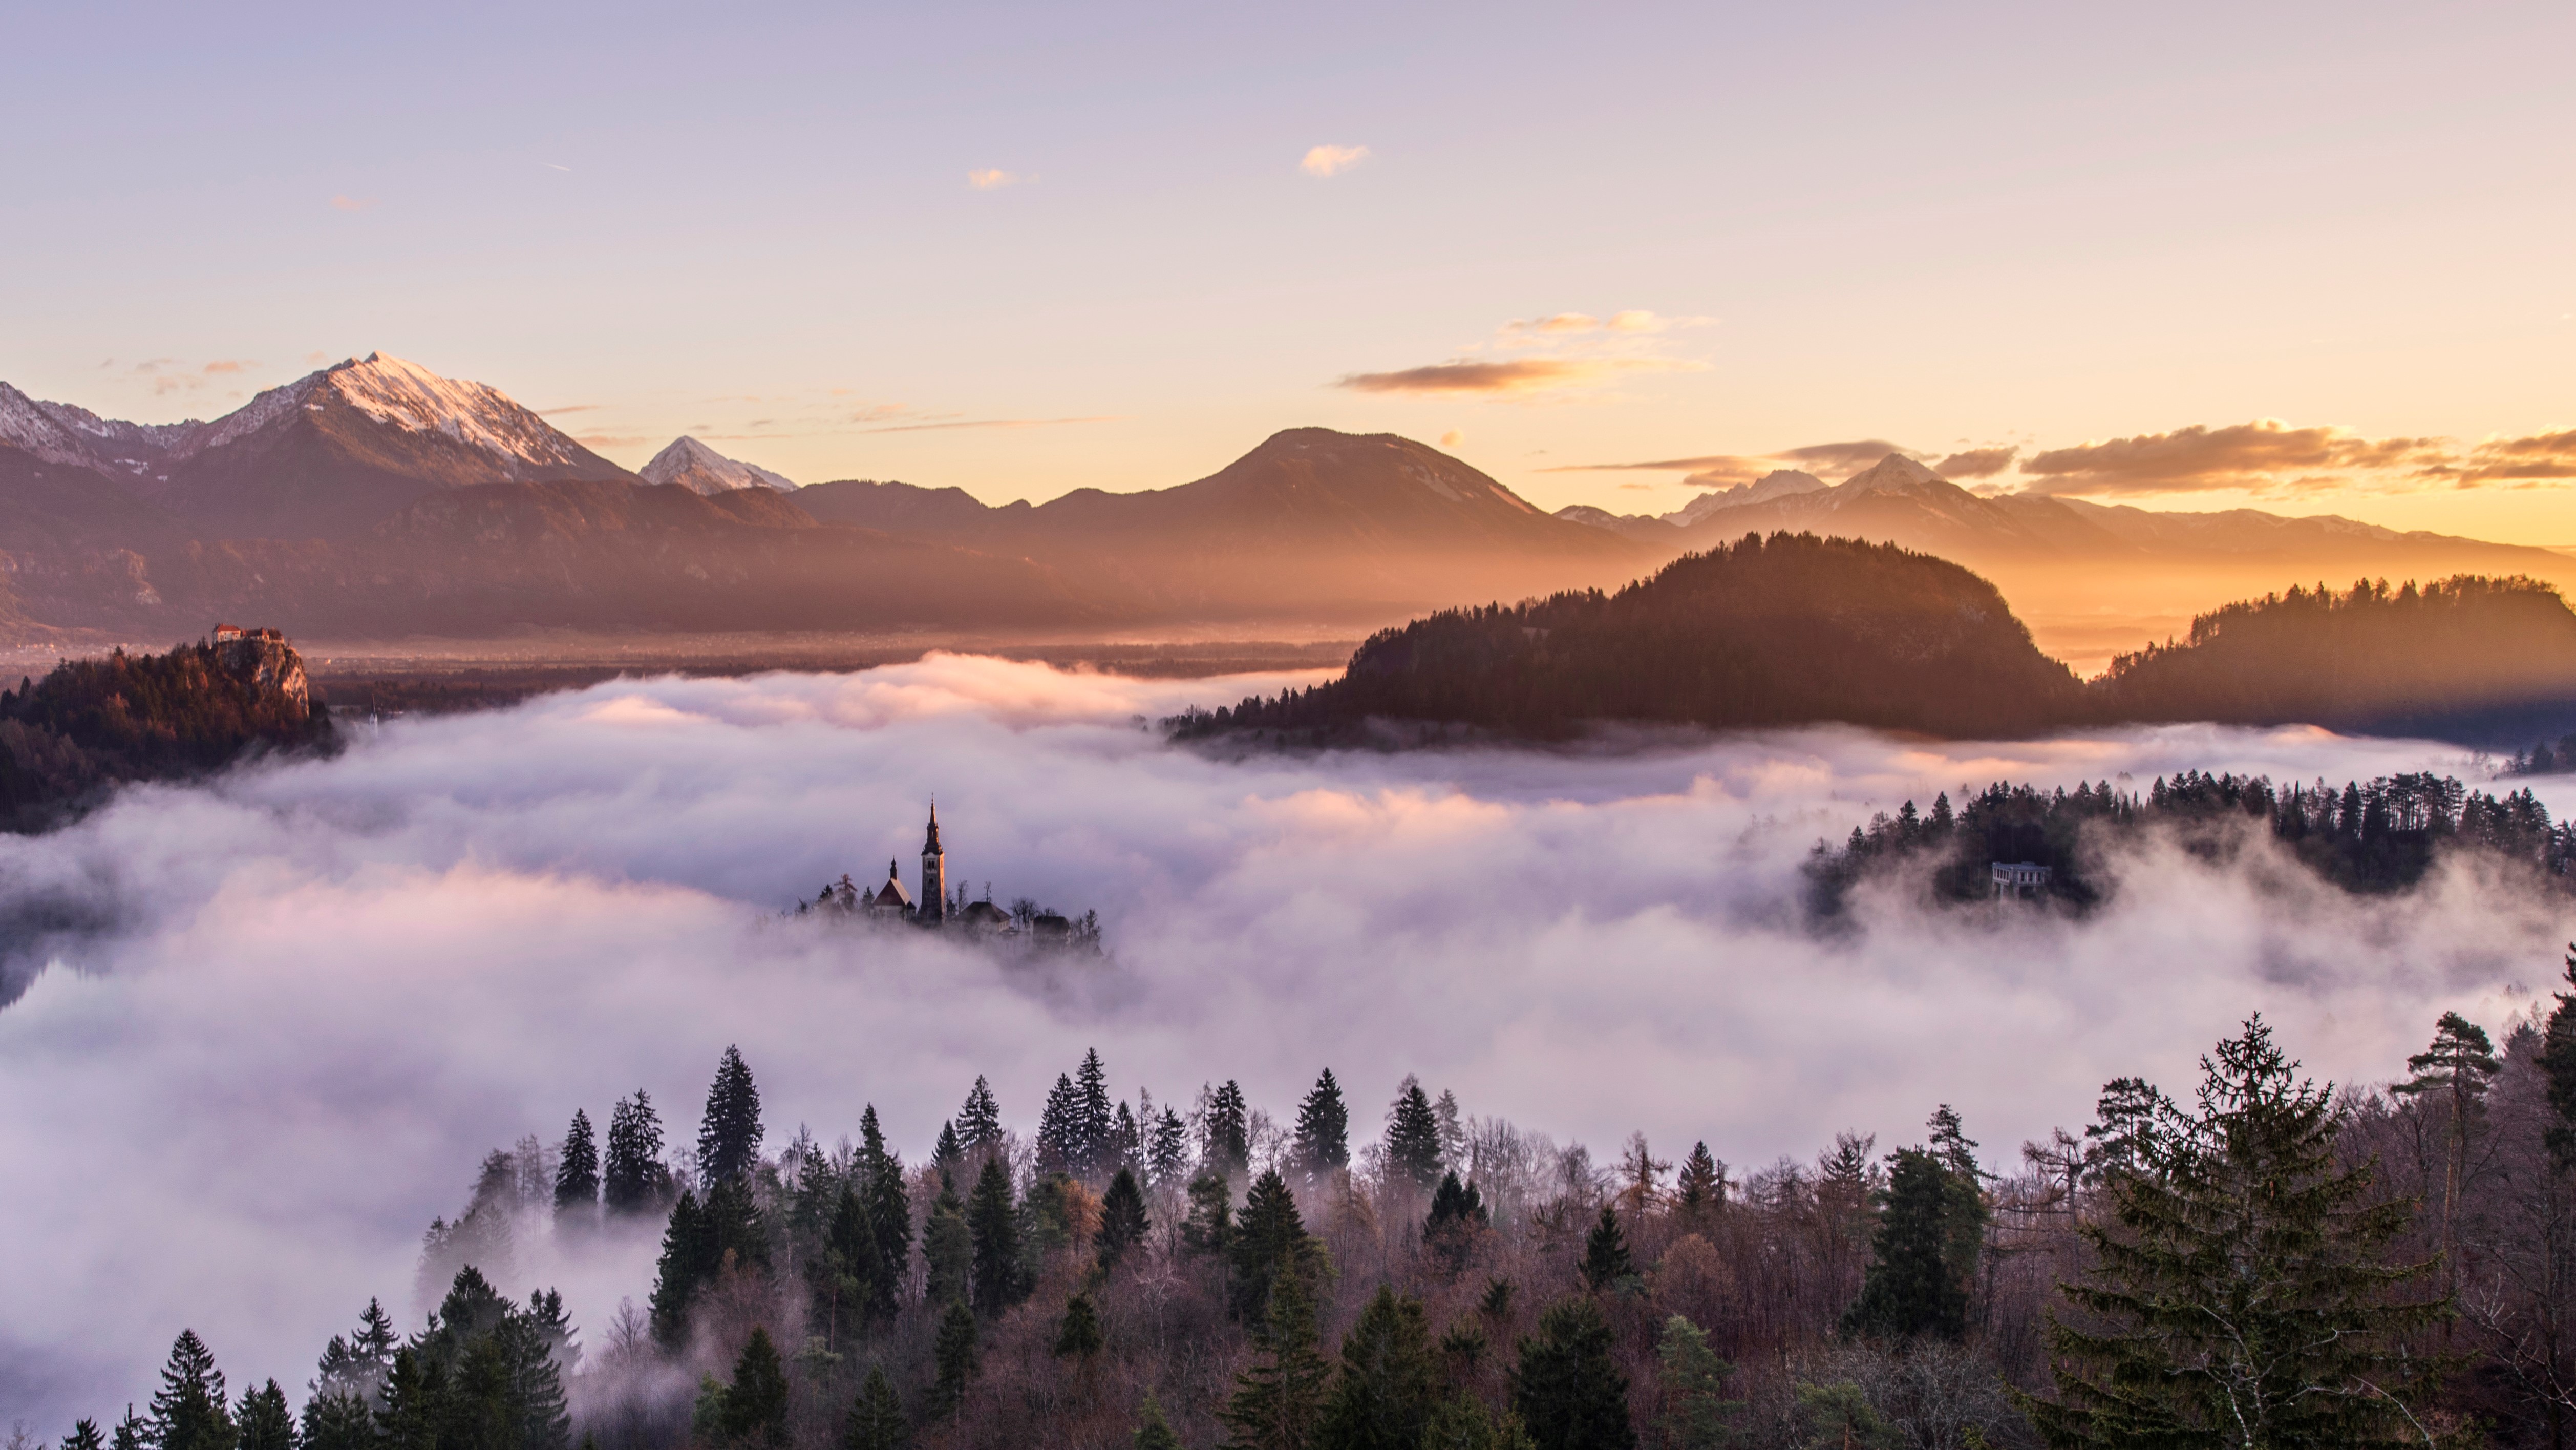 General 5031x2831 mist landscape mountains sky church forest snowy peak photography Slovenia trees Lake Bled island